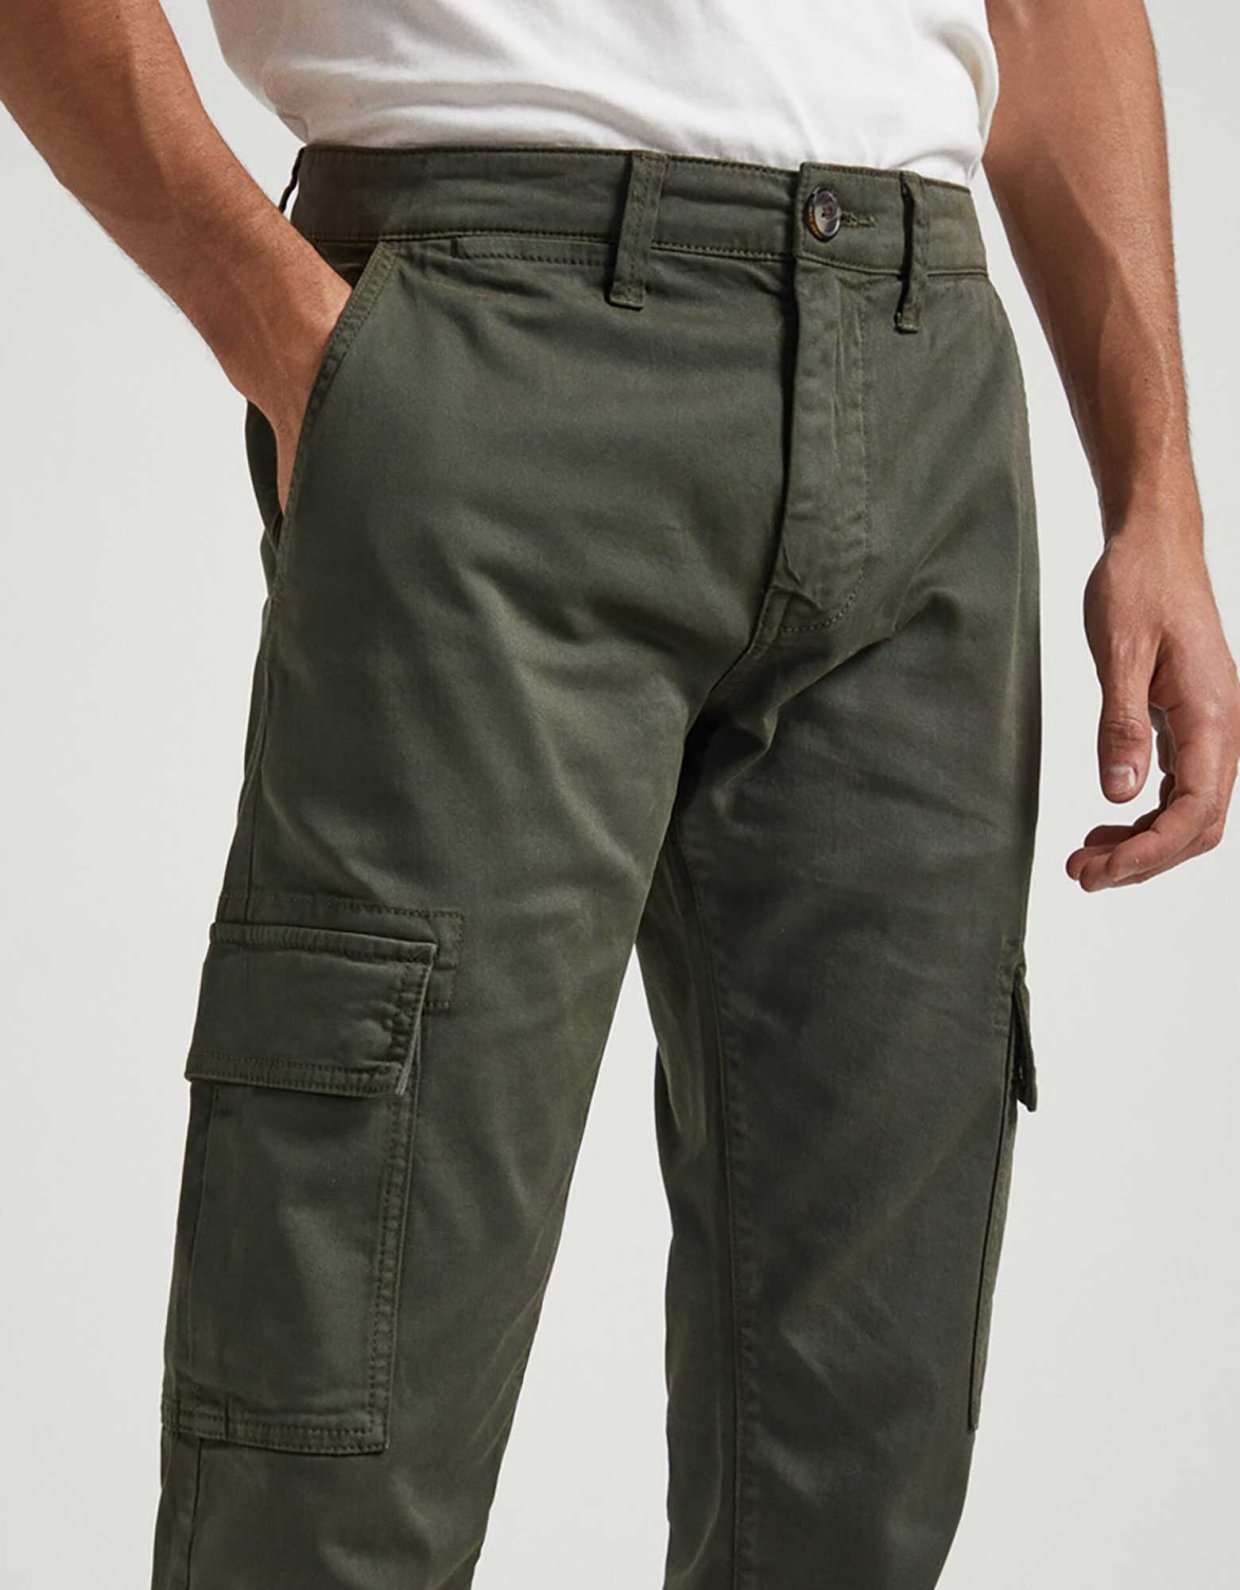 Pepe Jeans Sean 32 cargo pants olive